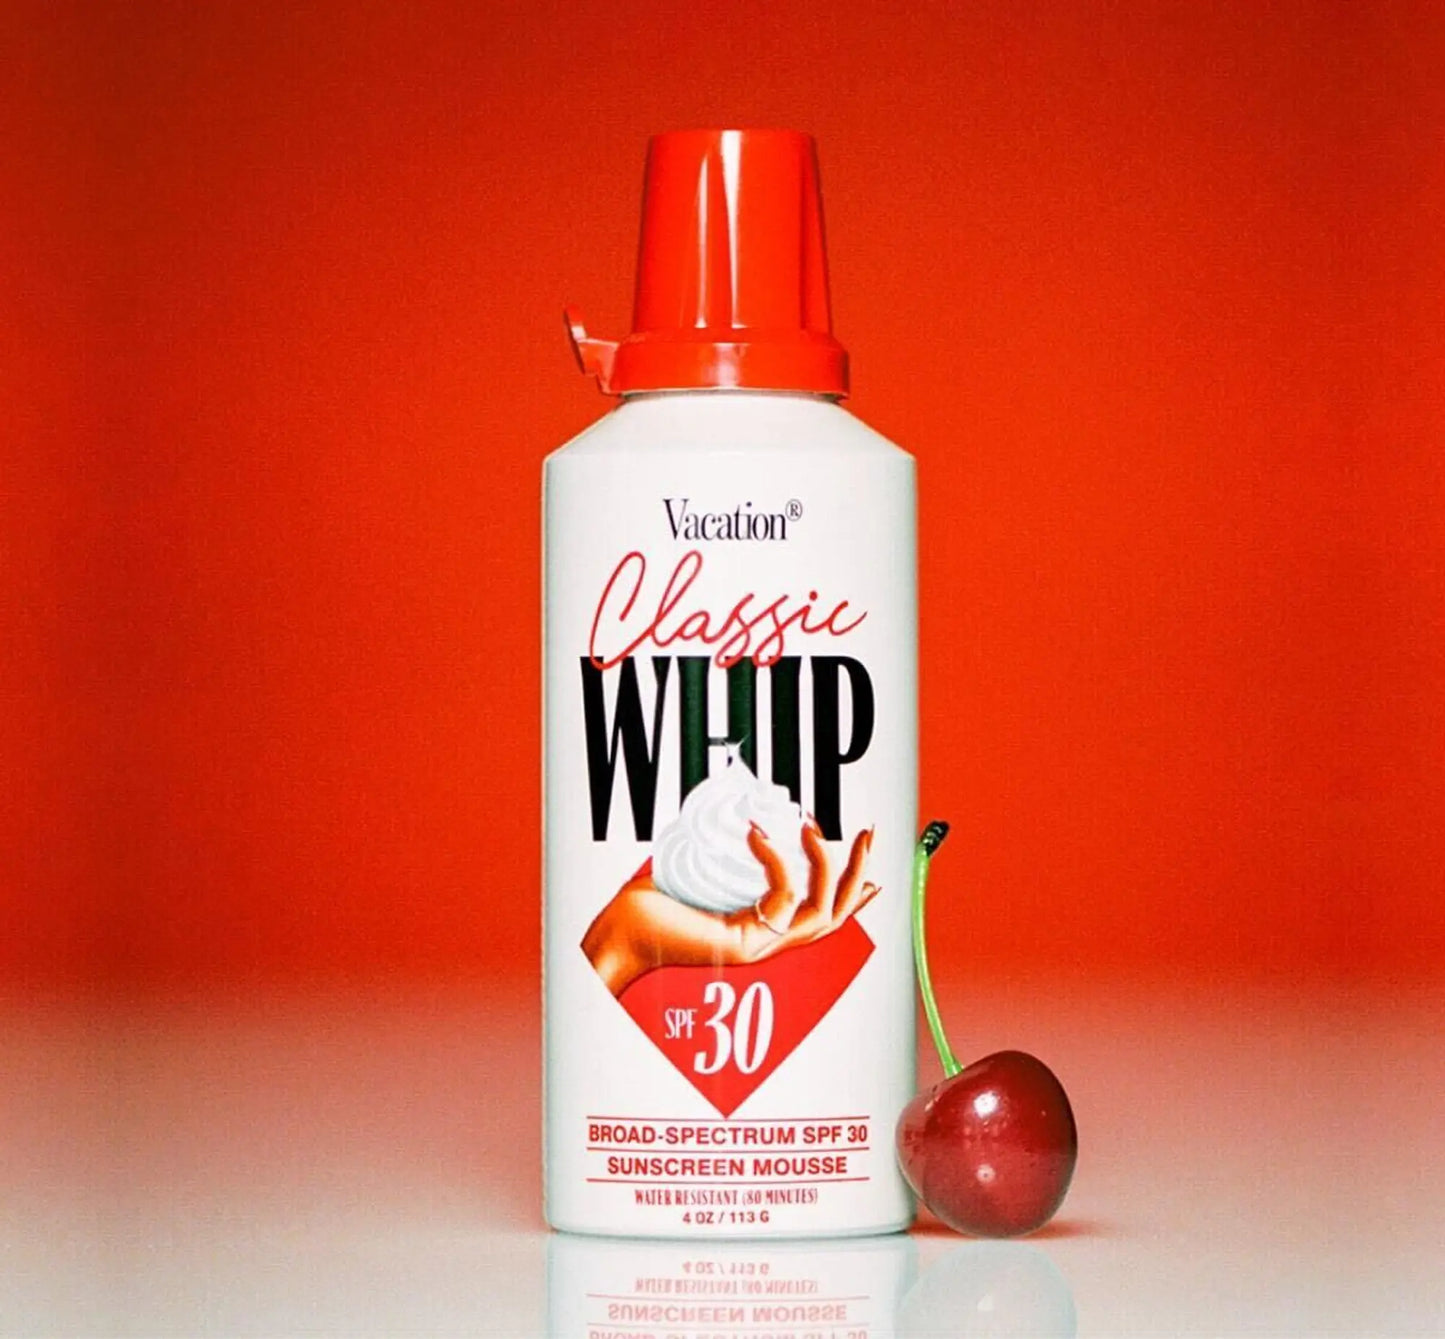 Vacation Classic Whipped SPF 30